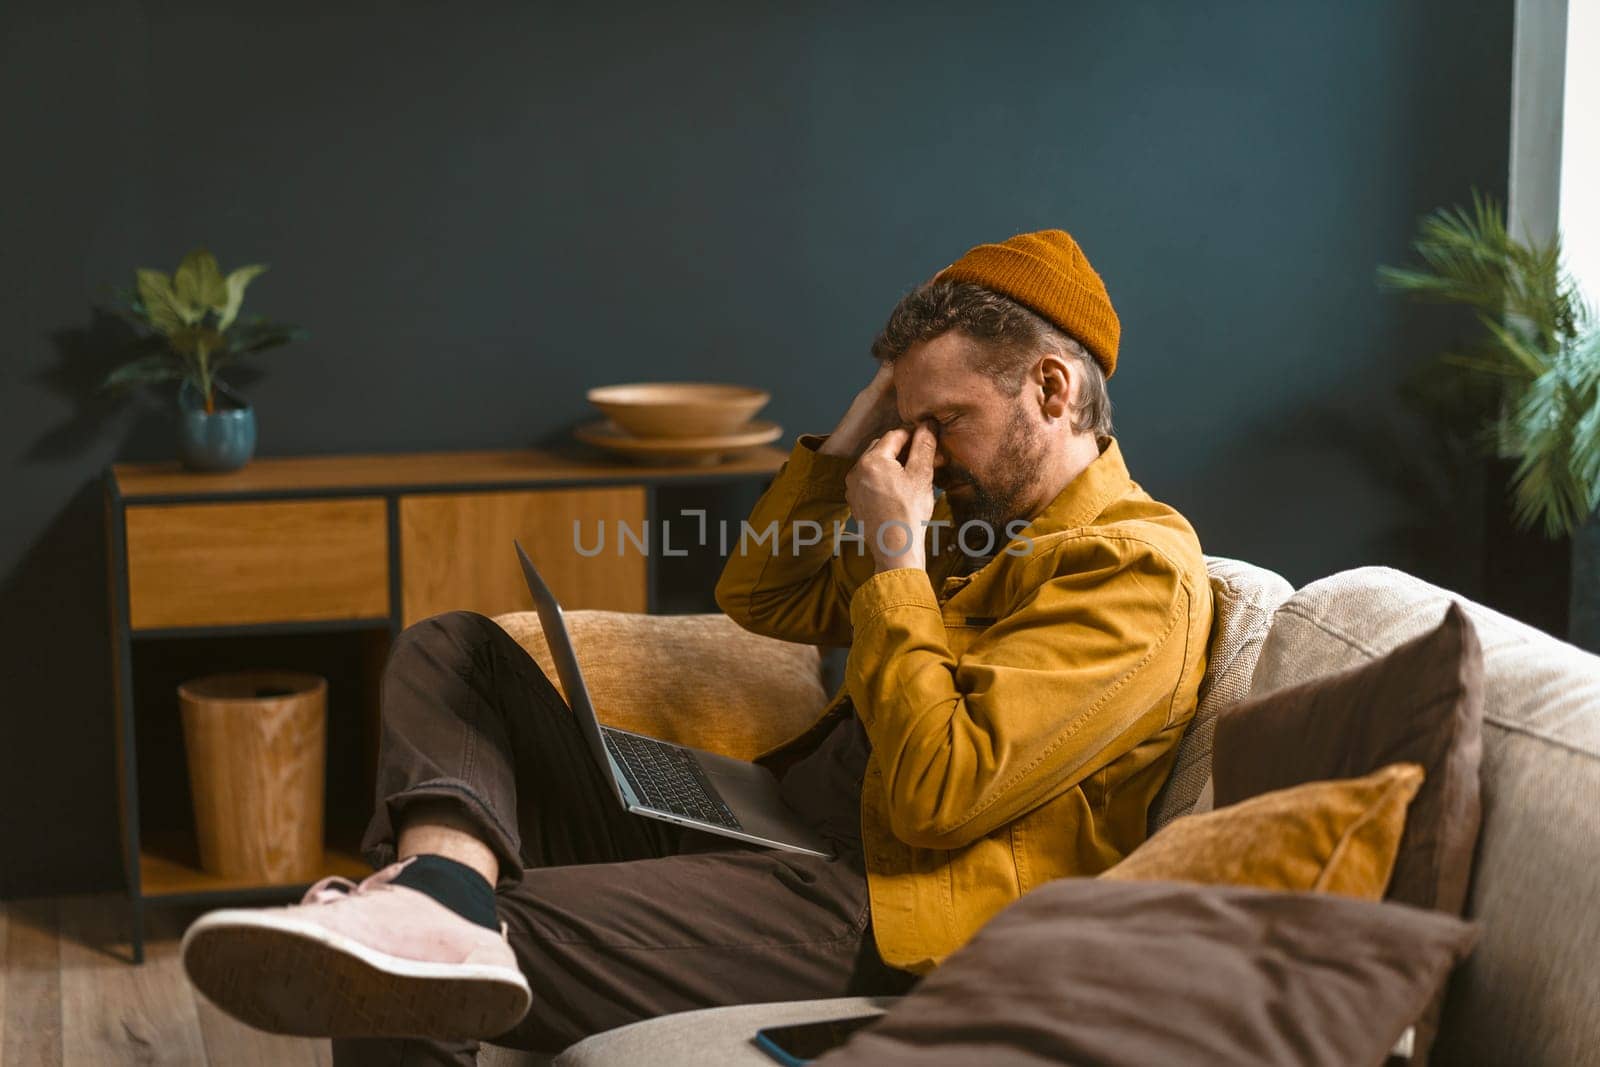 Sad and tired man is depicted sitting on a sofa at home. Overwhelmed by bad news or challenges, he holds his head with closed eyes in his hand, conveying a sense of emotional distress. by LipikStockMedia